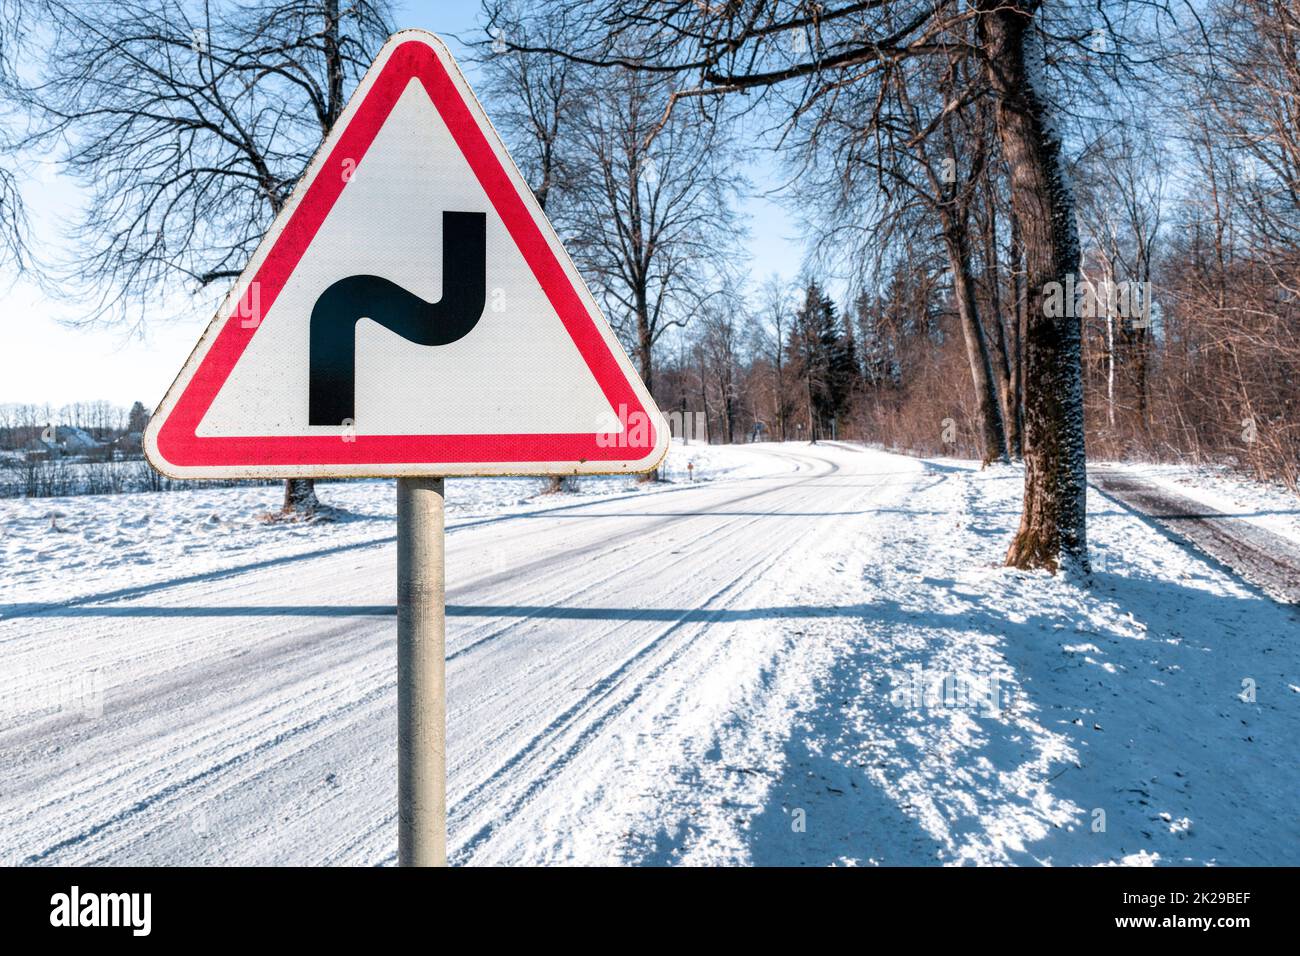 Warning road sign indicating a double bend in wintry conditions Stock Photo